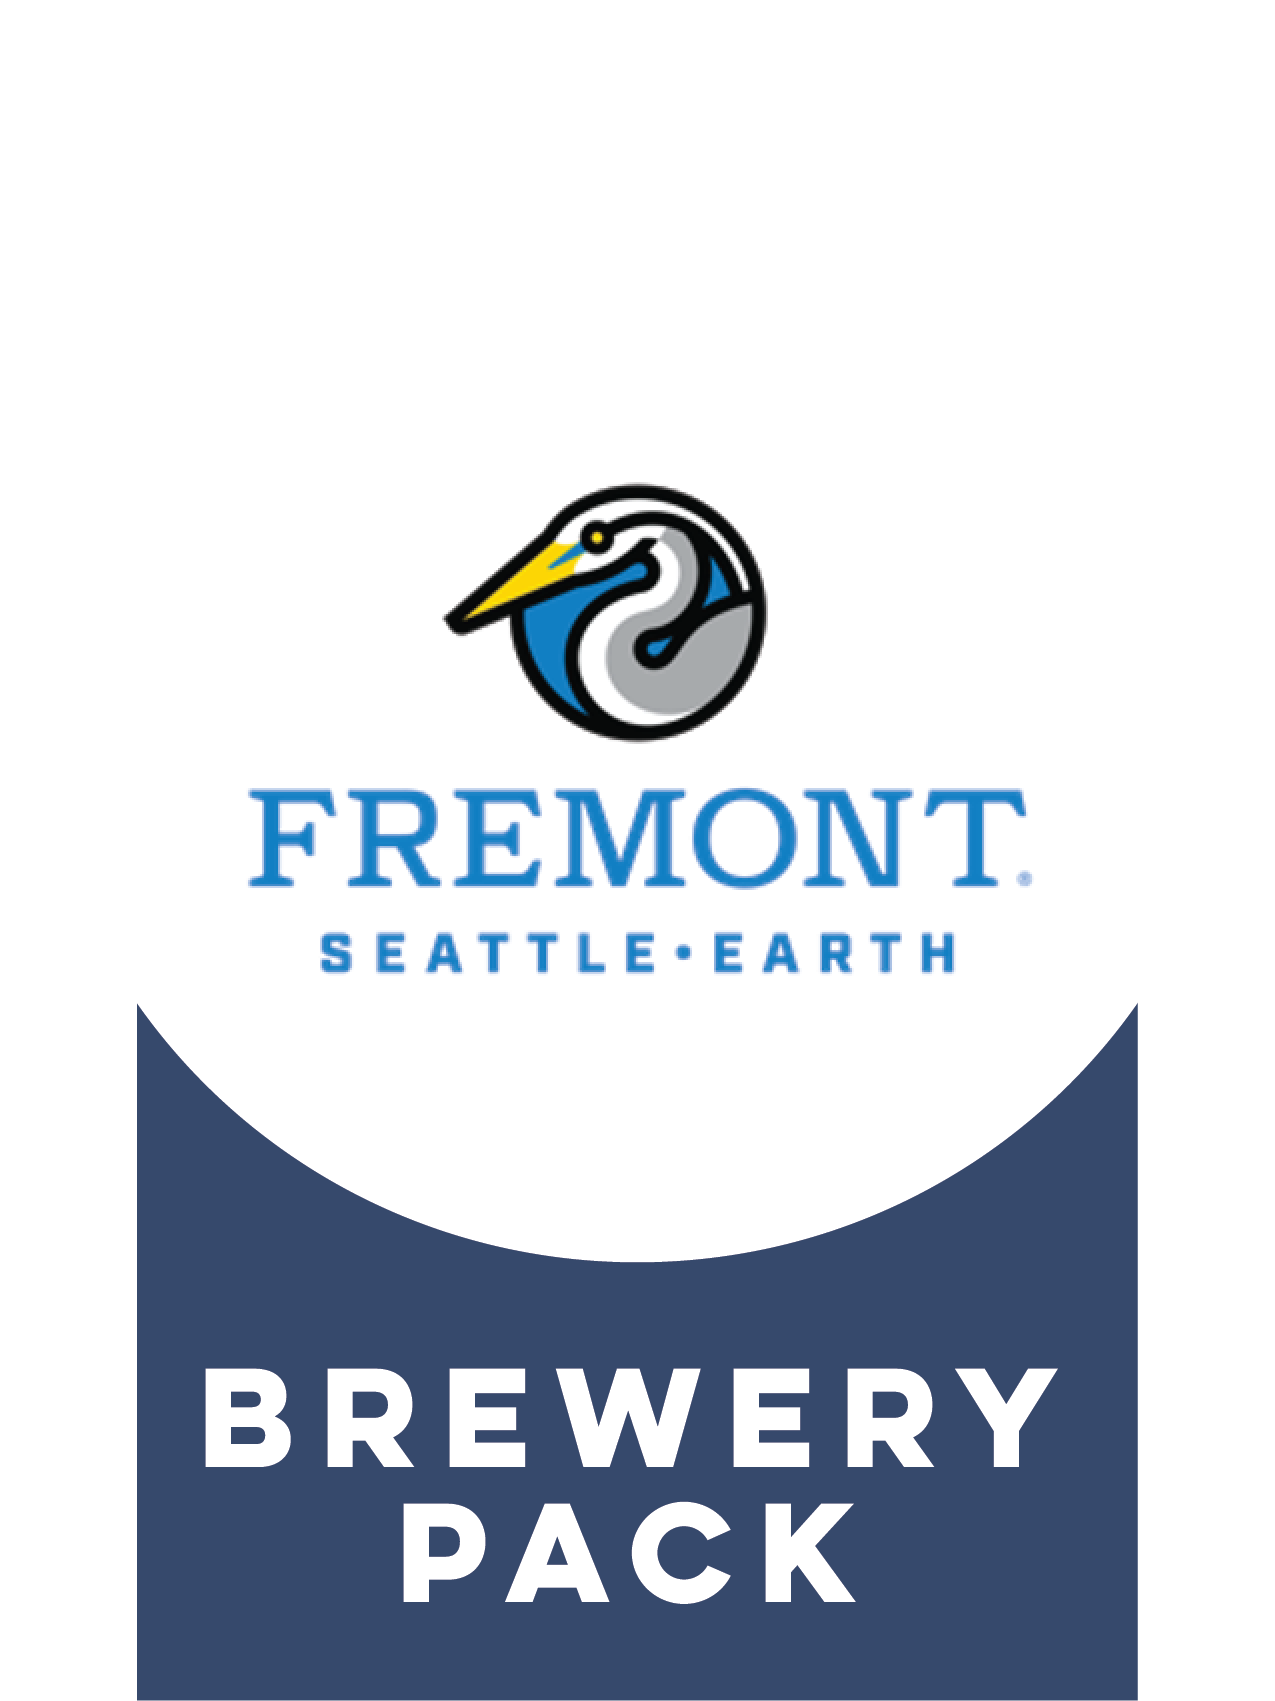 -Fremont- Fremont Brewery Pack Fresh Edition-Packs & Cases- Only @ Beer Republic - The best online beer store for American & Canadian craft beer - Buy beer online from the USA and Canada - Bier online kopen - Amerikaans bier kopen - Craft beer store - Craft beer kopen - Amerikanisch bier kaufen - Bier online kaufen - Acheter biere online - IPA - Stout - Porter - New England IPA - Hazy IPA - Imperial Stout - Barrel Aged - Barrel Aged Imperial Stout - Brown - Dark beer - Blond - Blonde - Pilsner - Lager - Whe